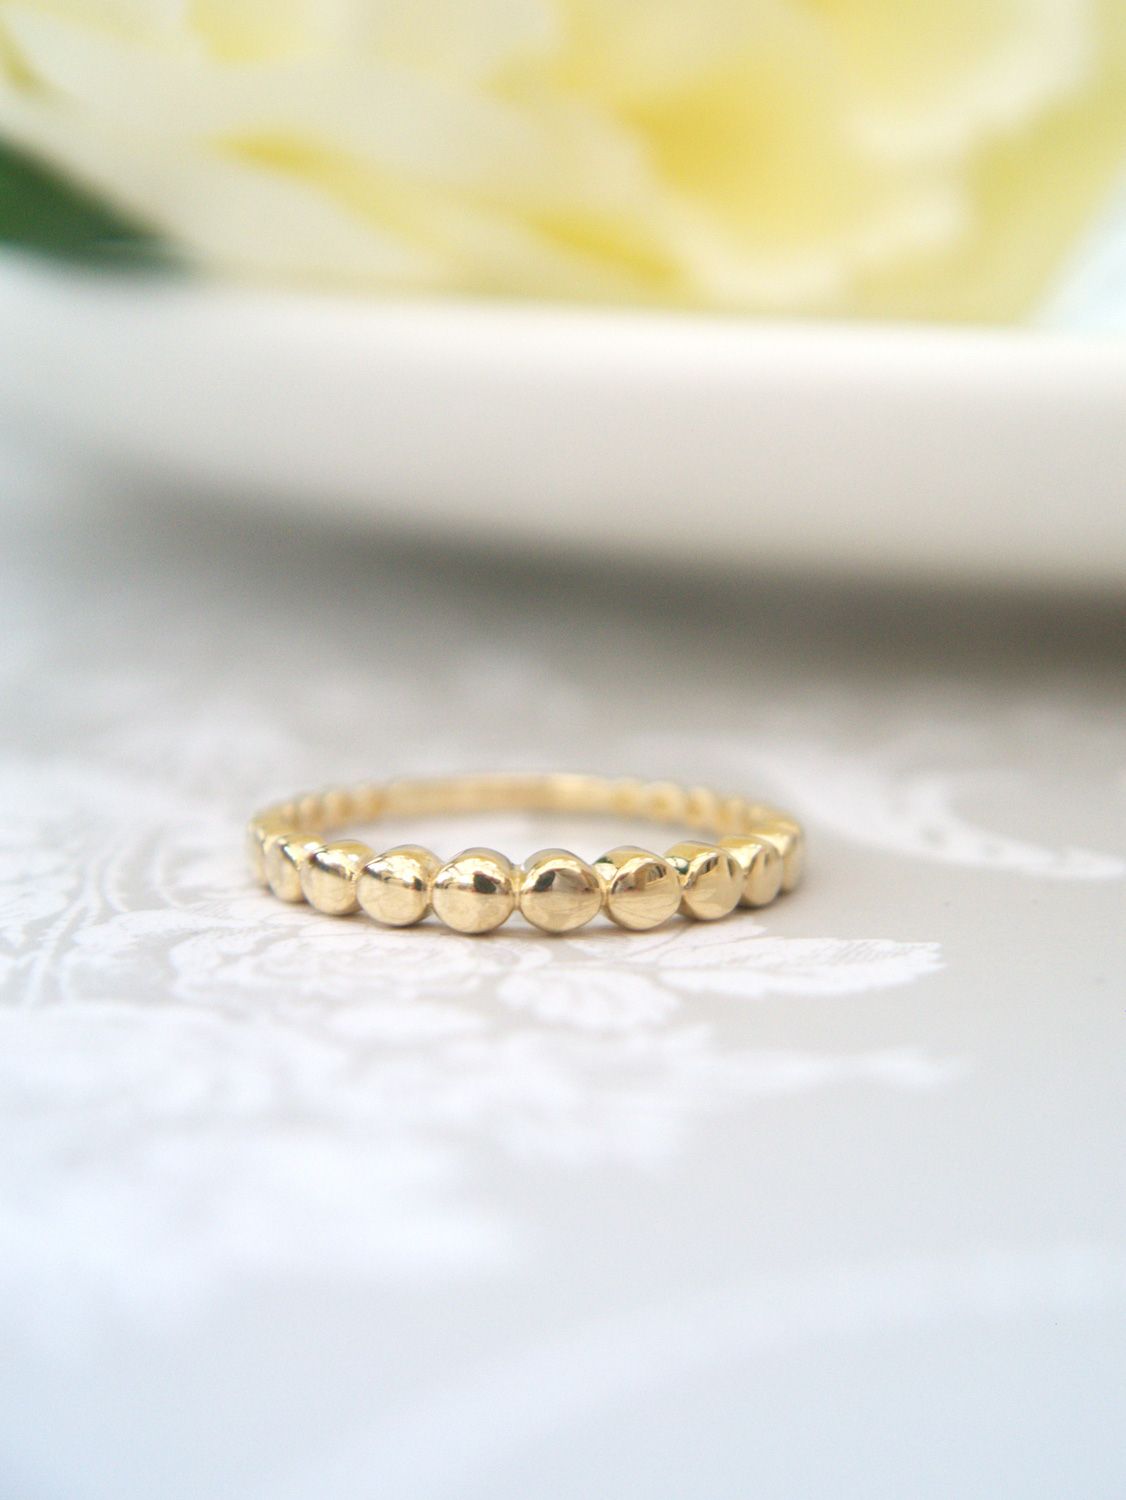 Stackable Yellow Gold Ring With Graduated Circles | Chains Of Gold With Bubbles Gold Band Rings (View 8 of 25)